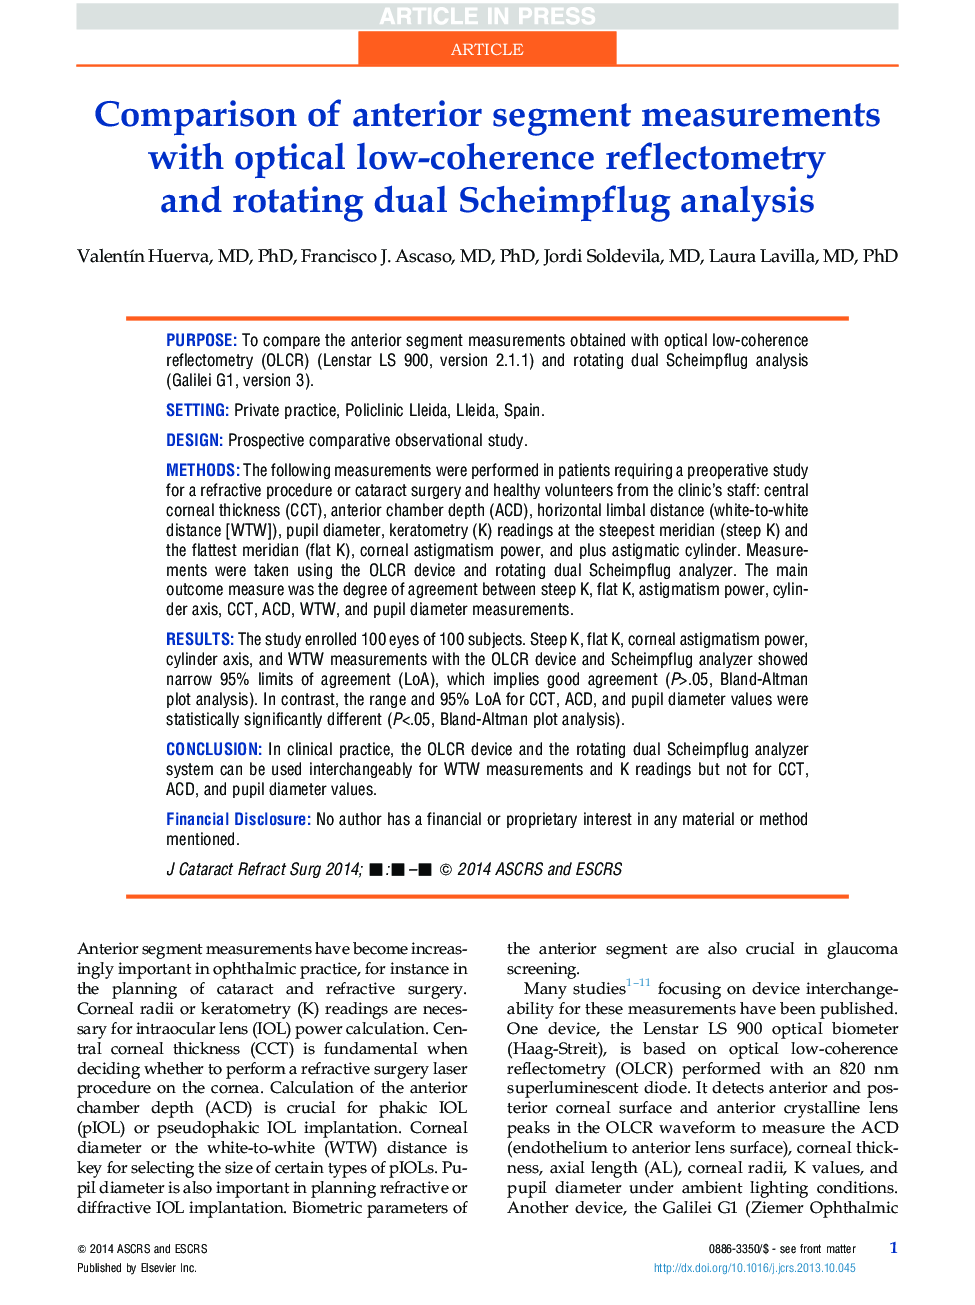 Comparison of anterior segment measurements with optical low-coherence reflectometry andÂ rotating dual Scheimpflug analysis